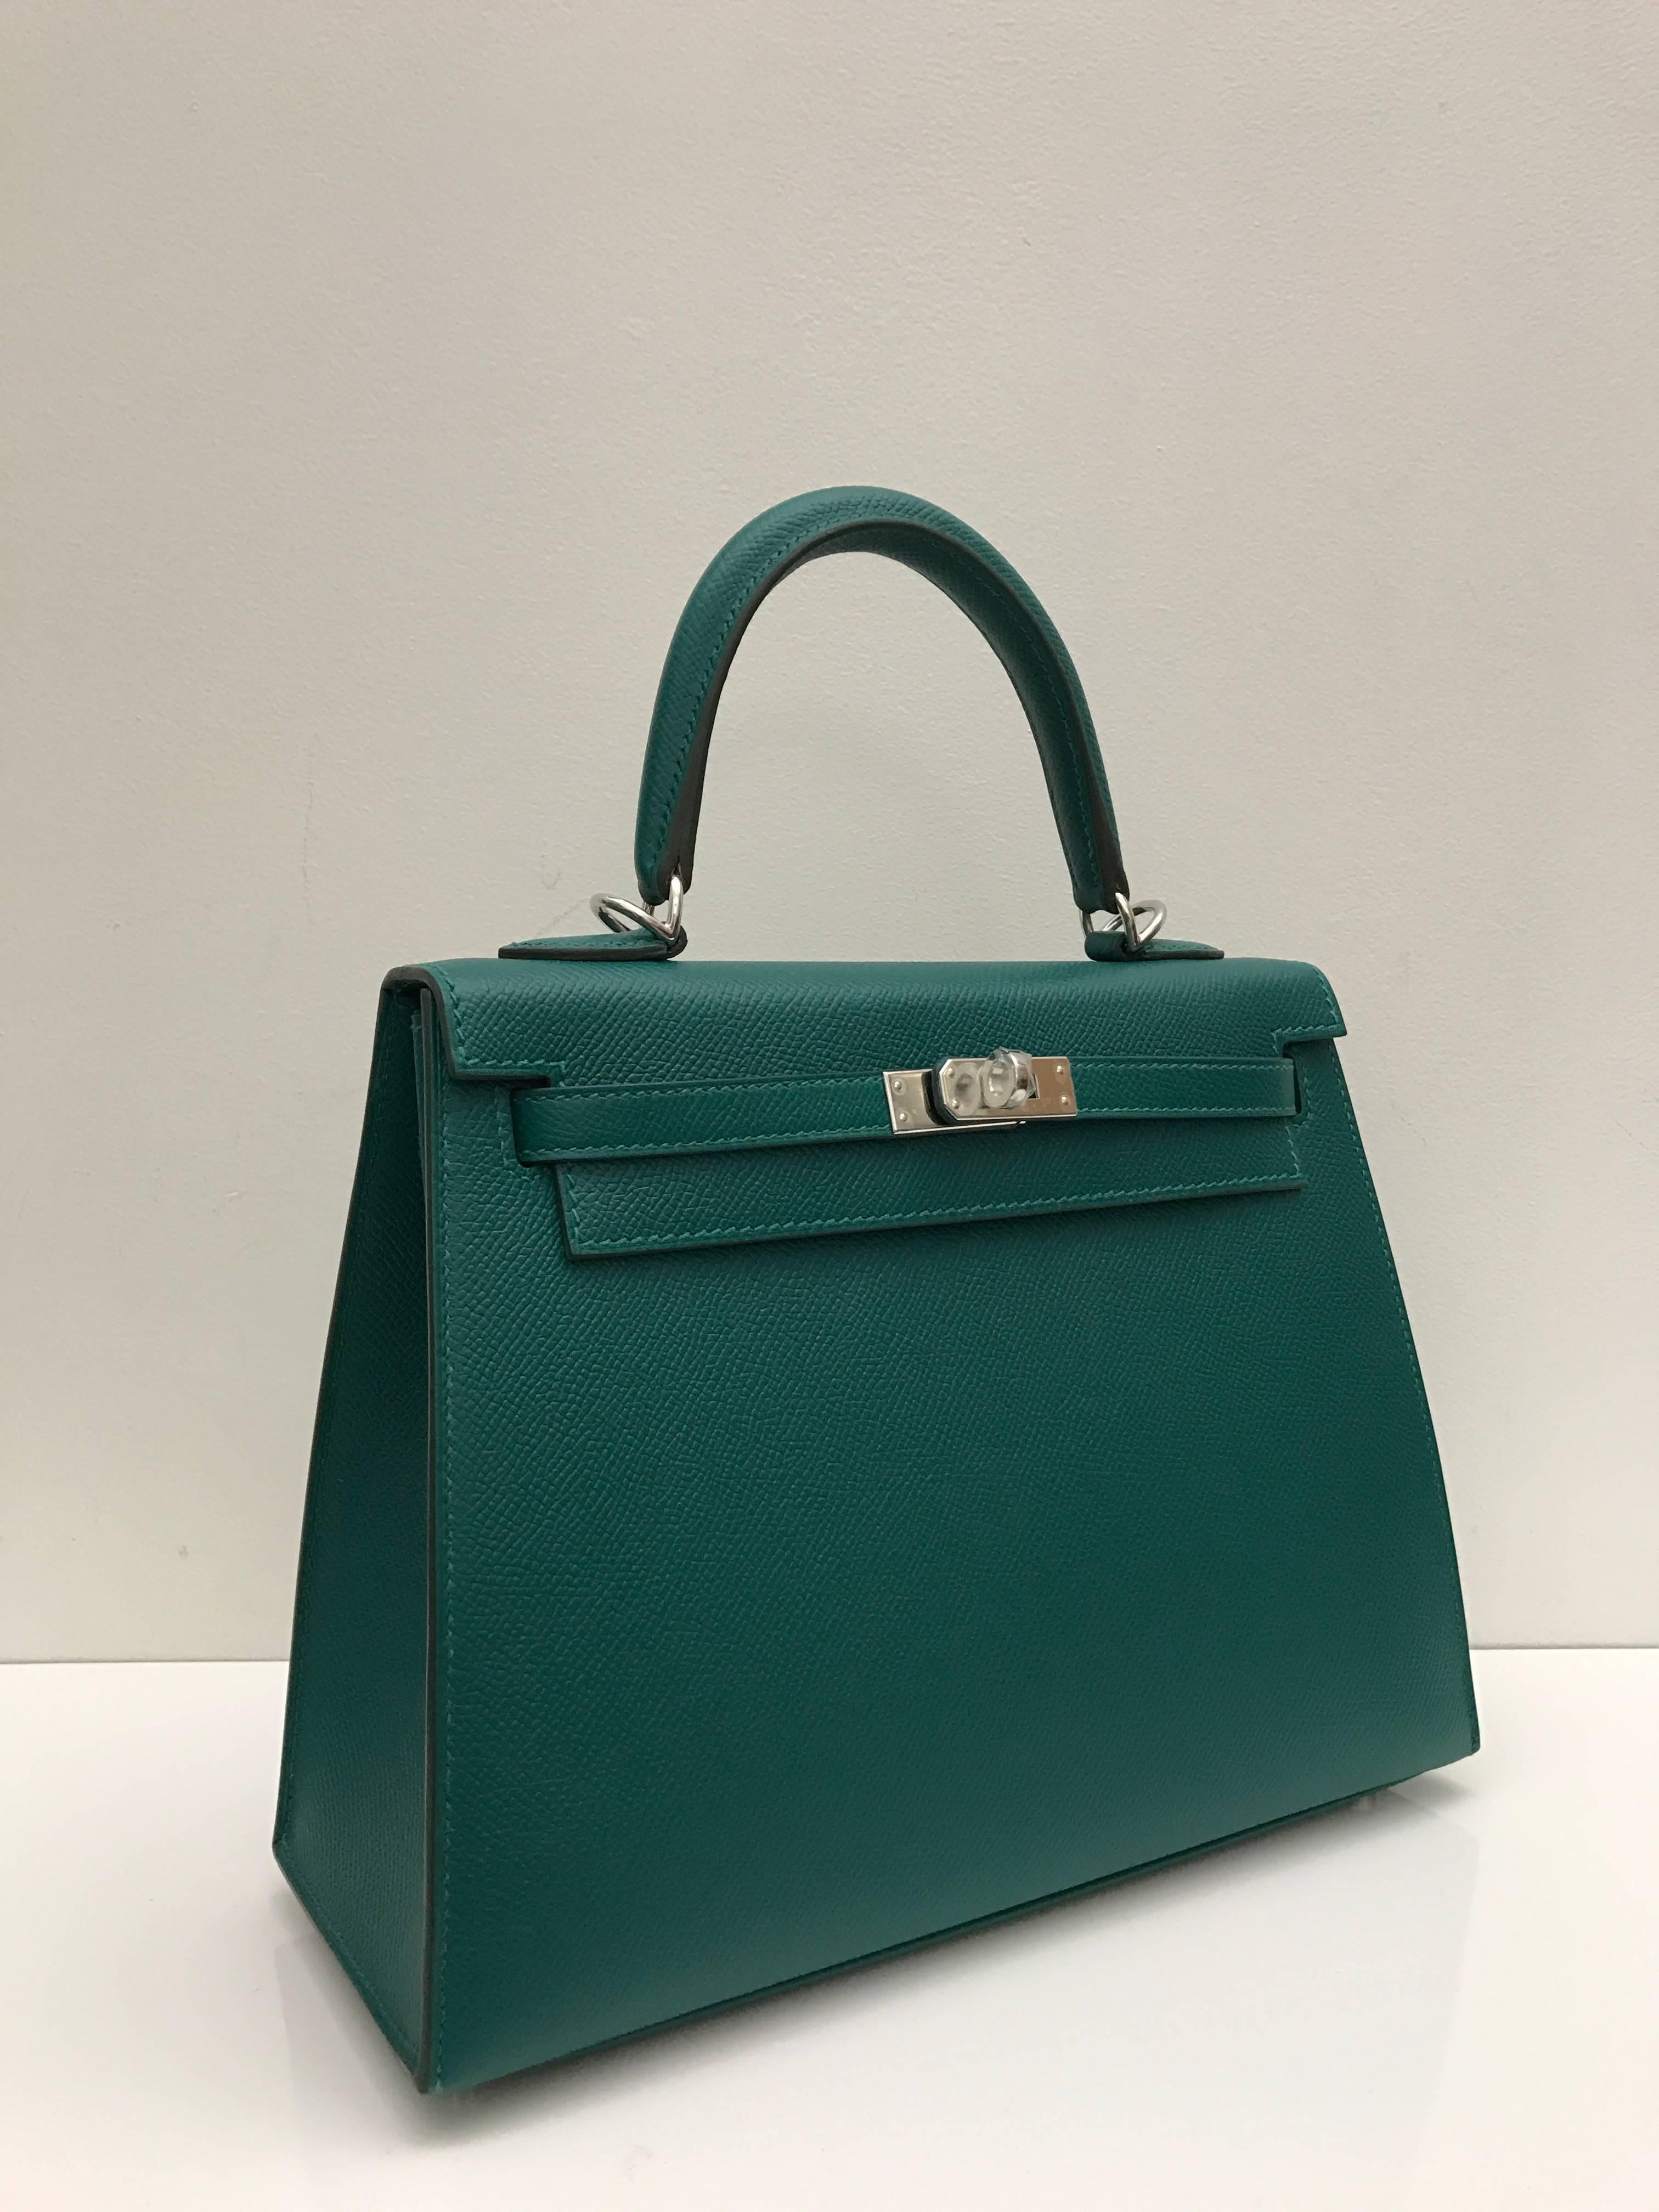 Hermes 
Kelly Size 25
Epsom Leather 
Colour Green Malachite 
Silver Hardware
Store fresh, comes with receipt and full set (dust bag, box...) 
Hydeparkfashion specializes in sourcing and delivering authentic luxury handbags, mainly Hermes, to clients